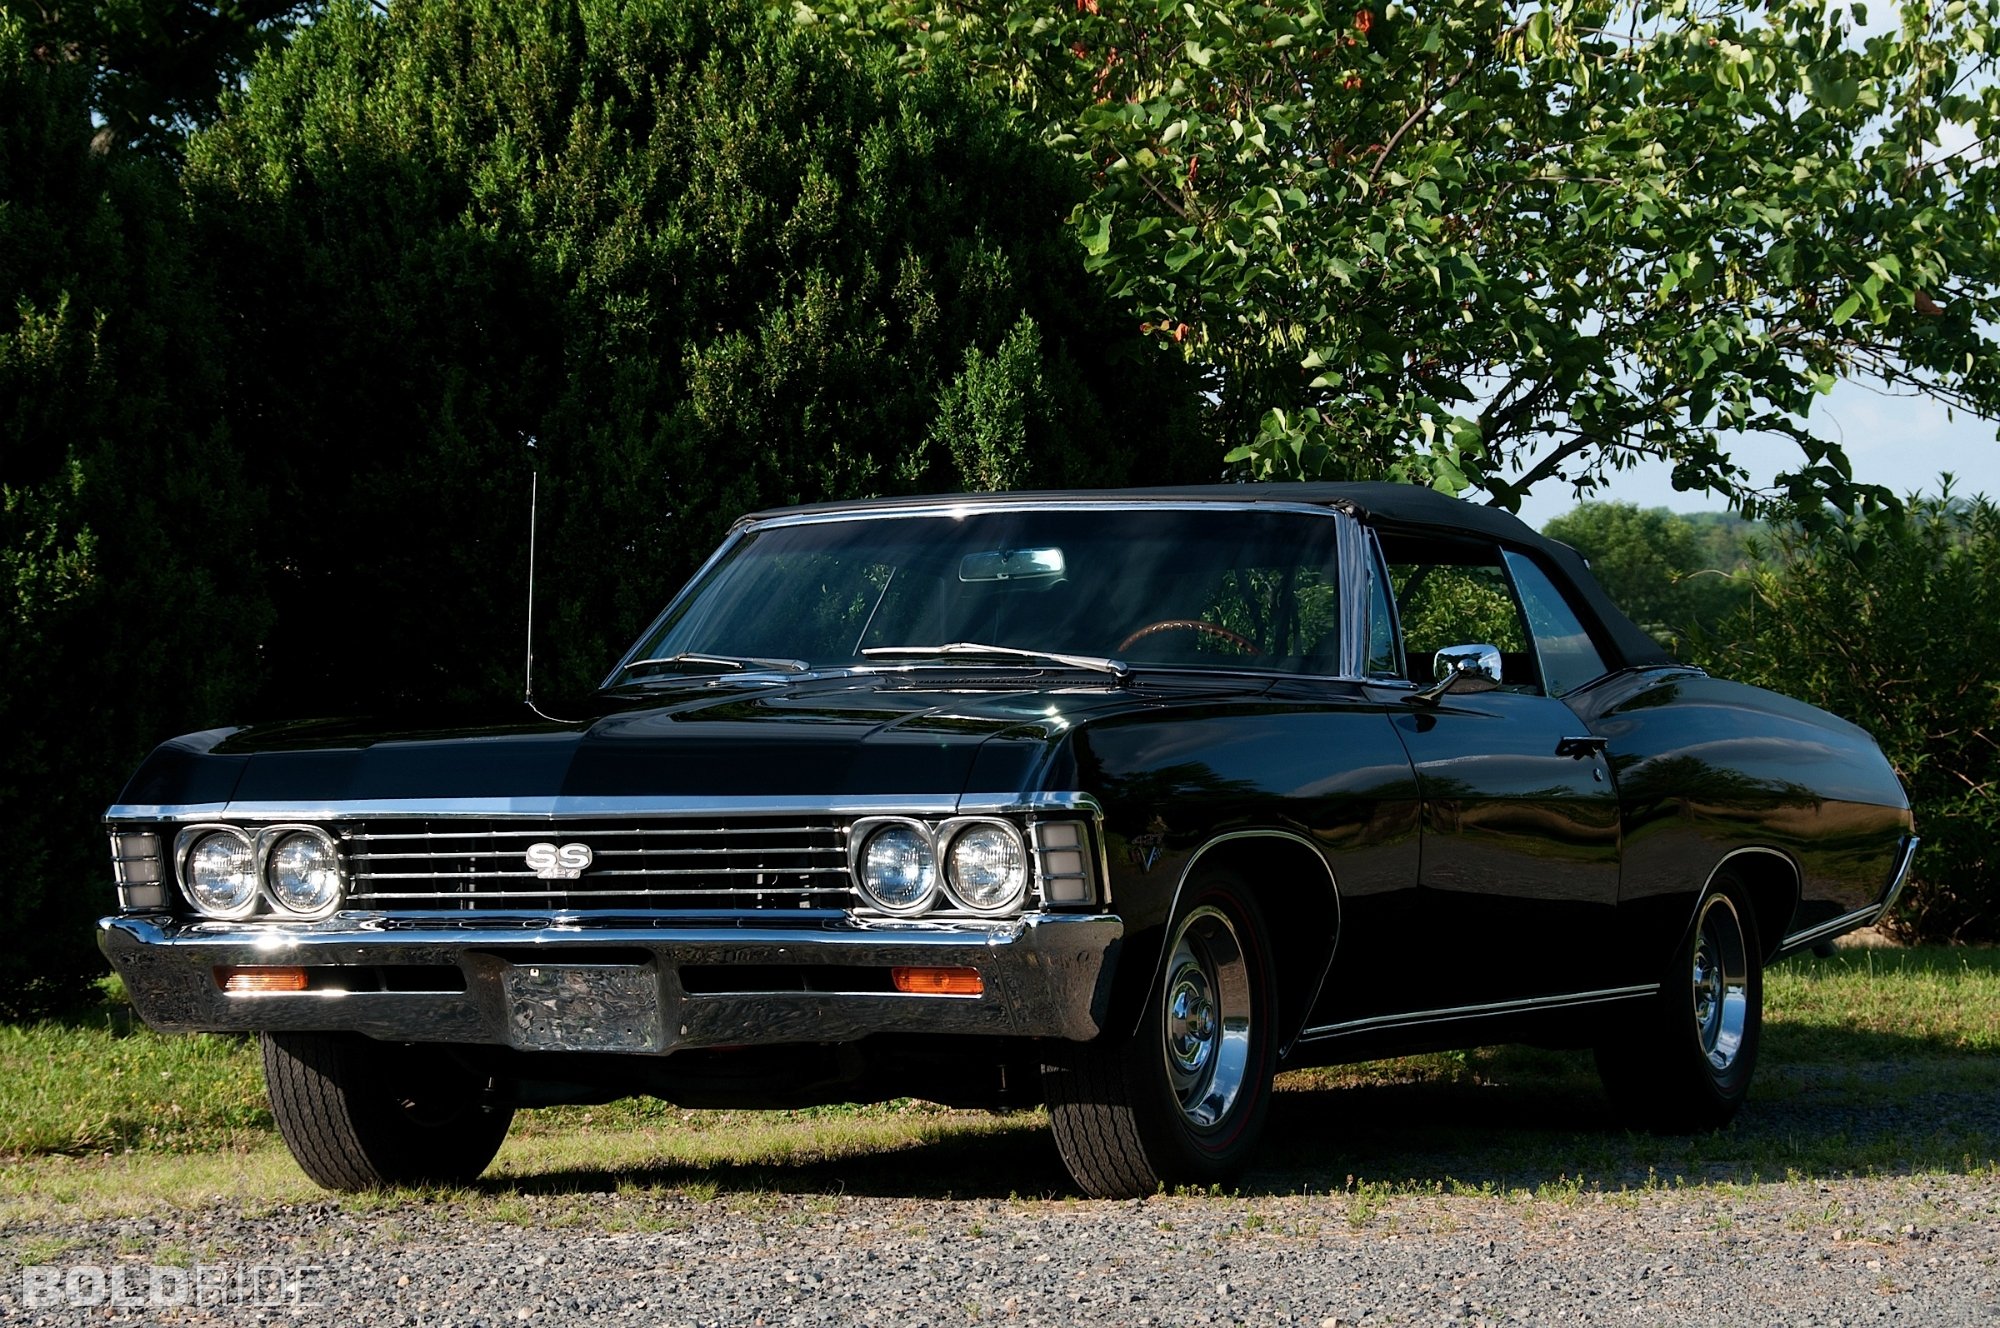 Chevrolet Impala Ss Wallpapers